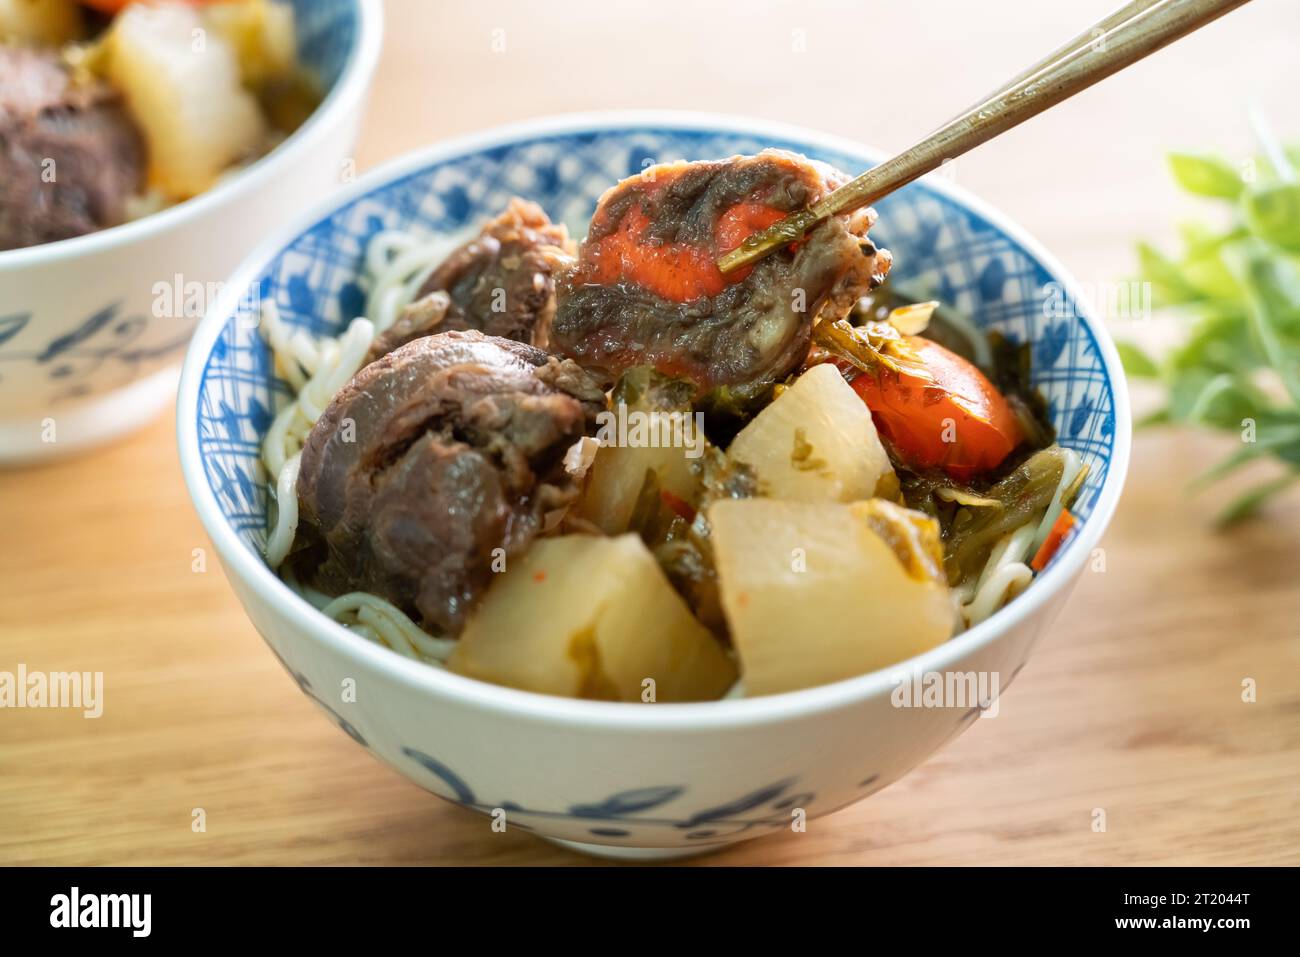 Beef noodle soup. Taiwanese famous food with sliced red braised beef and vegetables in a bowl on wooden table background. Stock Photo